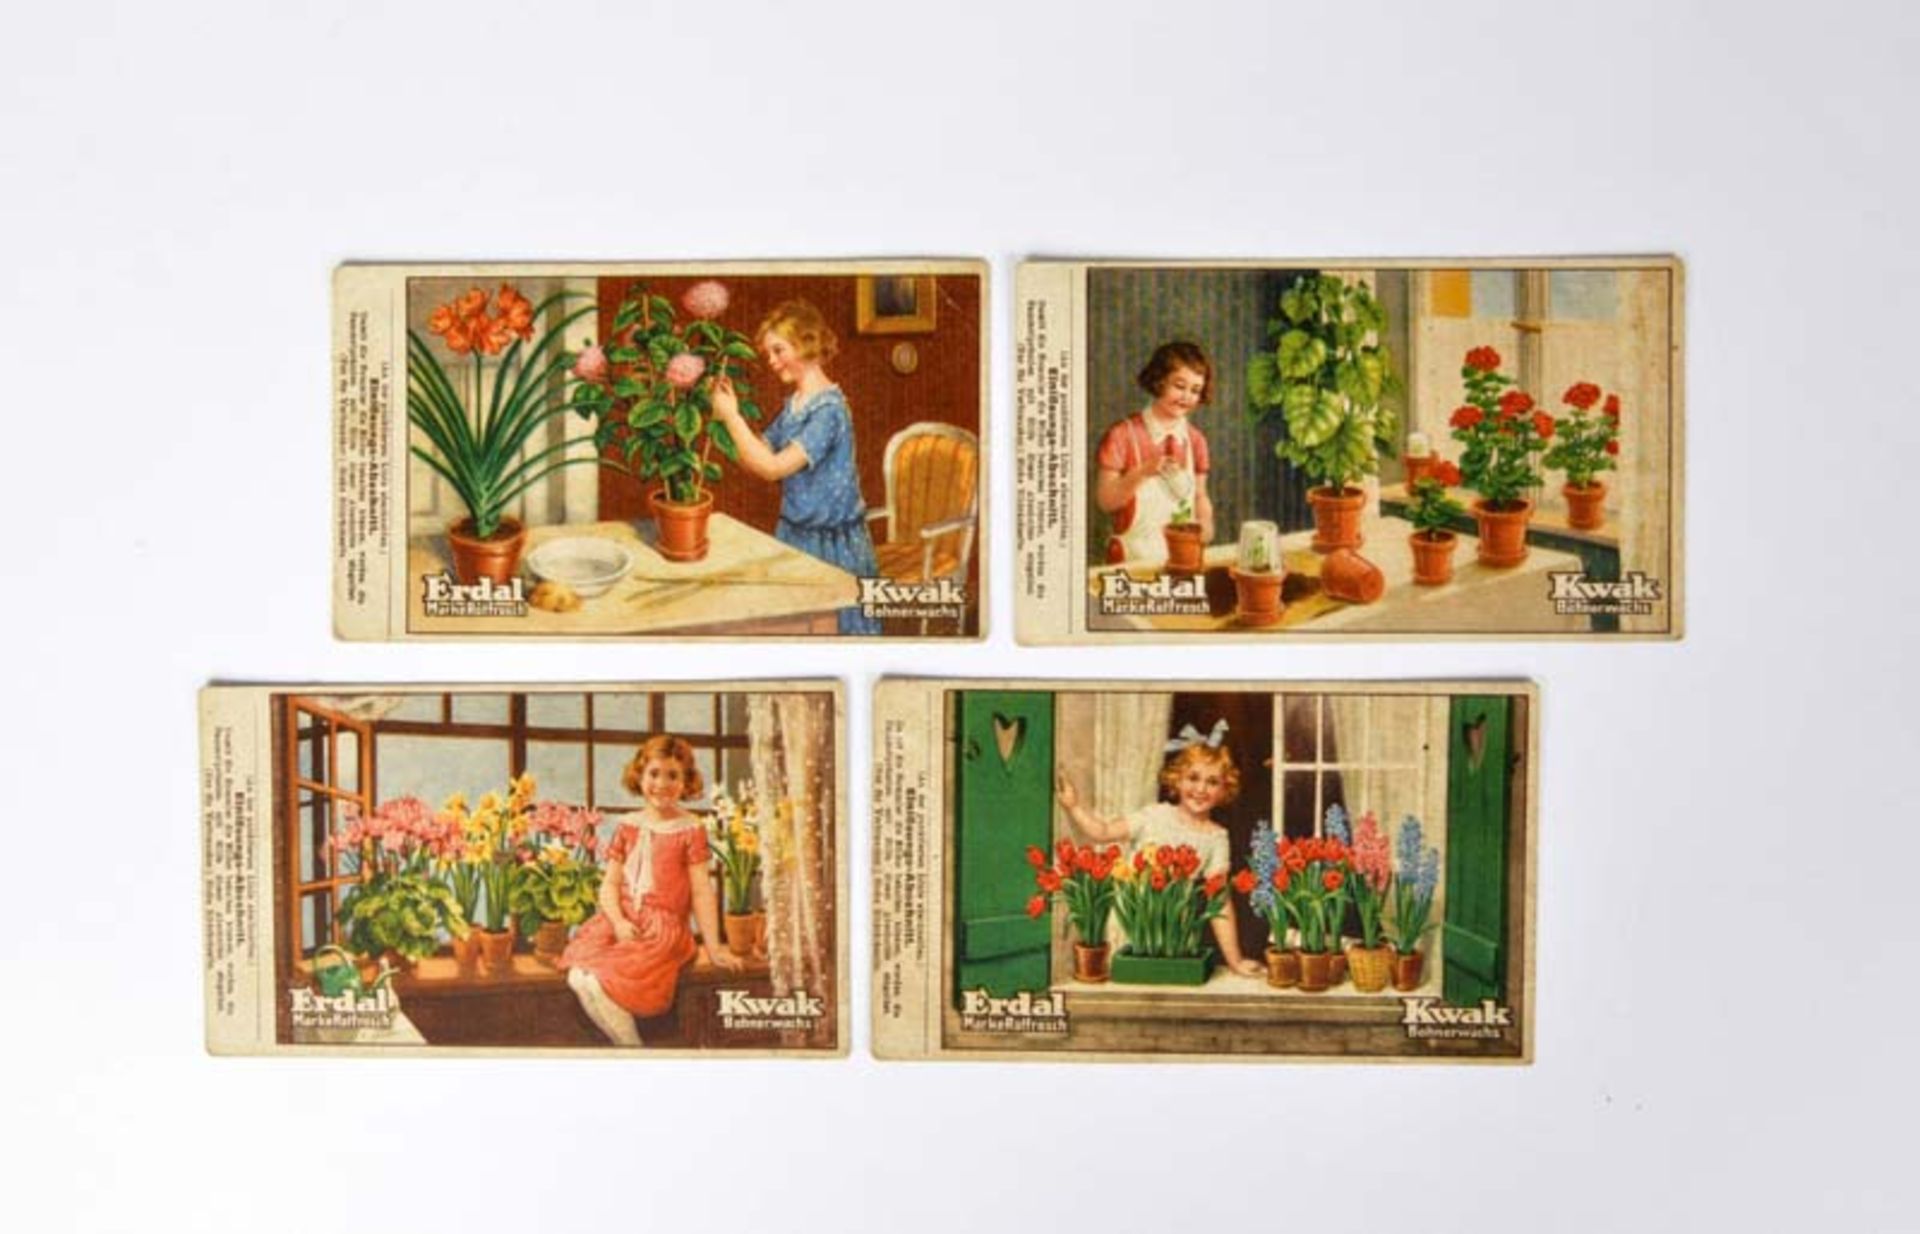 Erdal 4 Cards, Germany pw, C 1-2